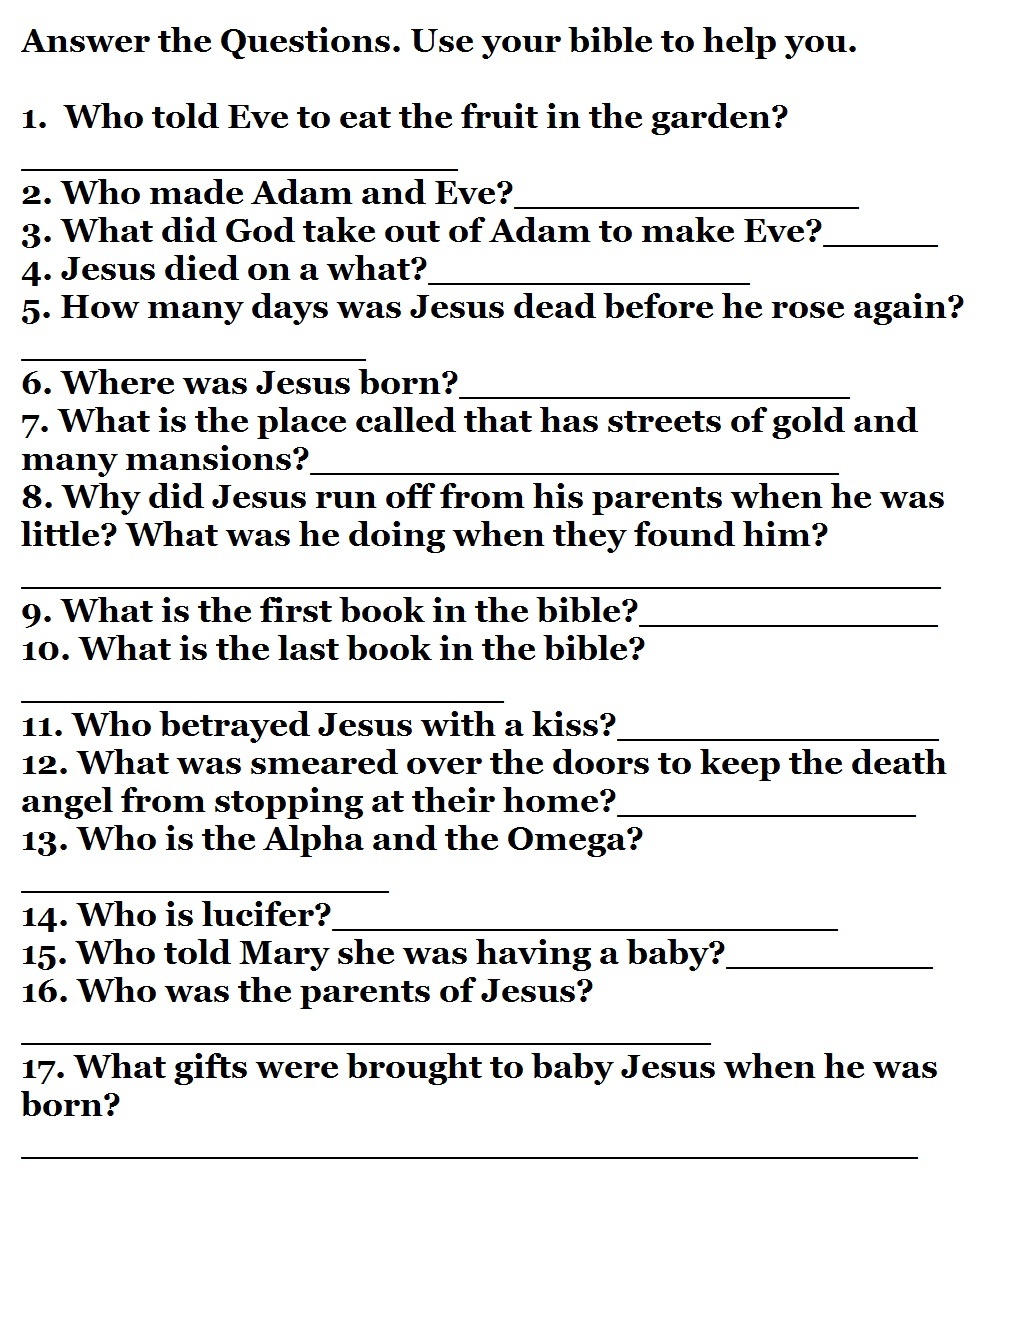 Printable Bible Quizzes - Free Bible Questions And Answers Printable